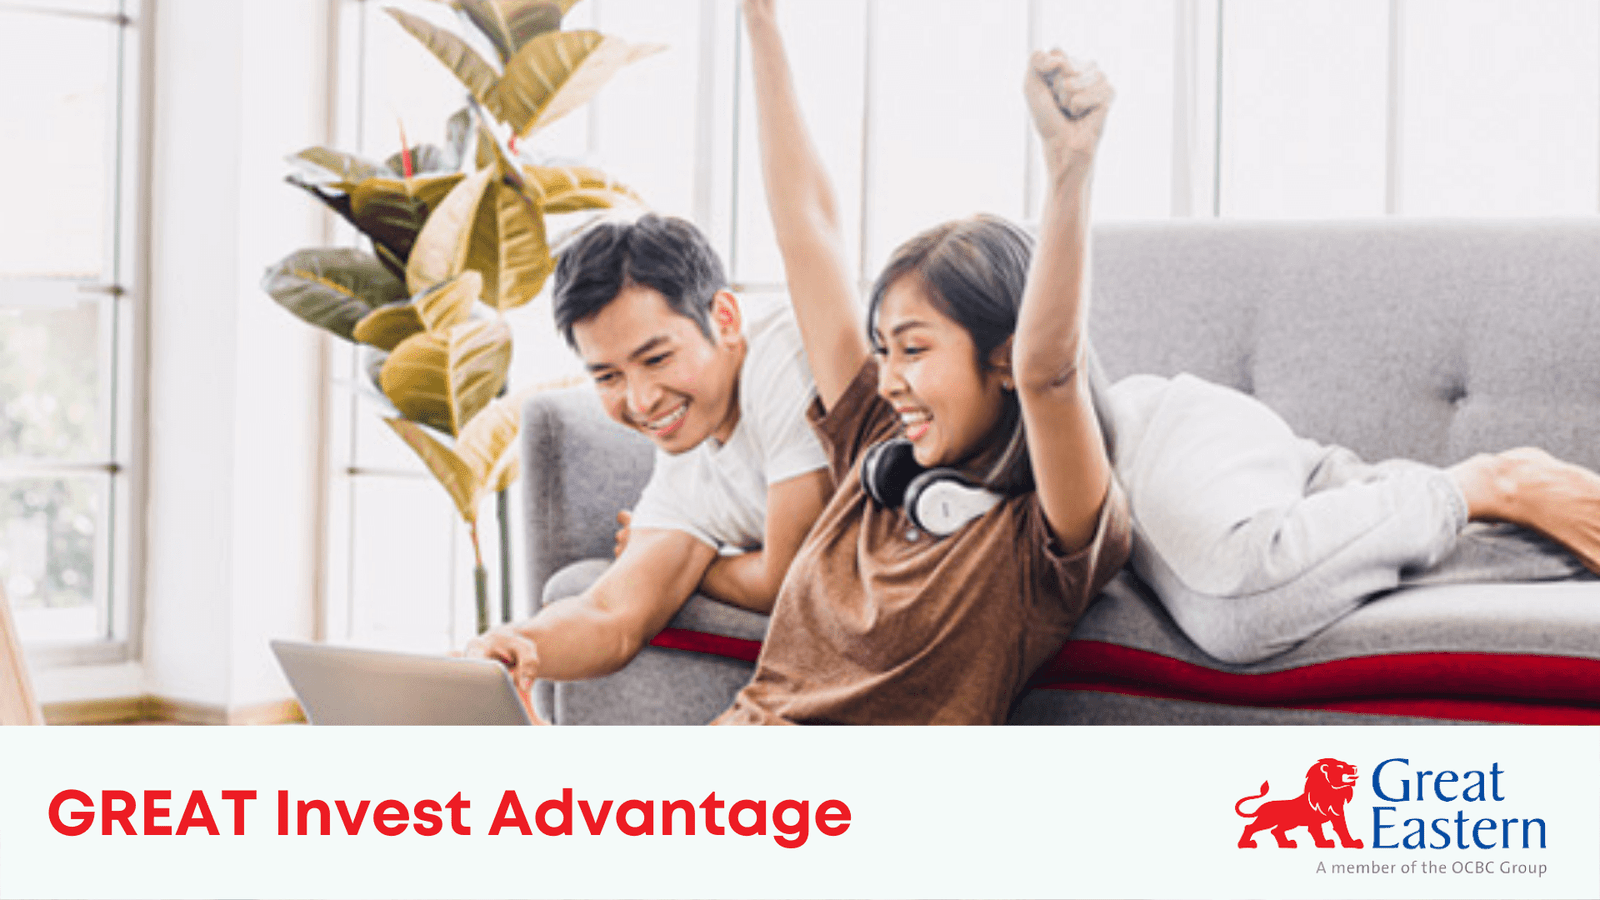 Great Eastern GREAT Invest Advantage